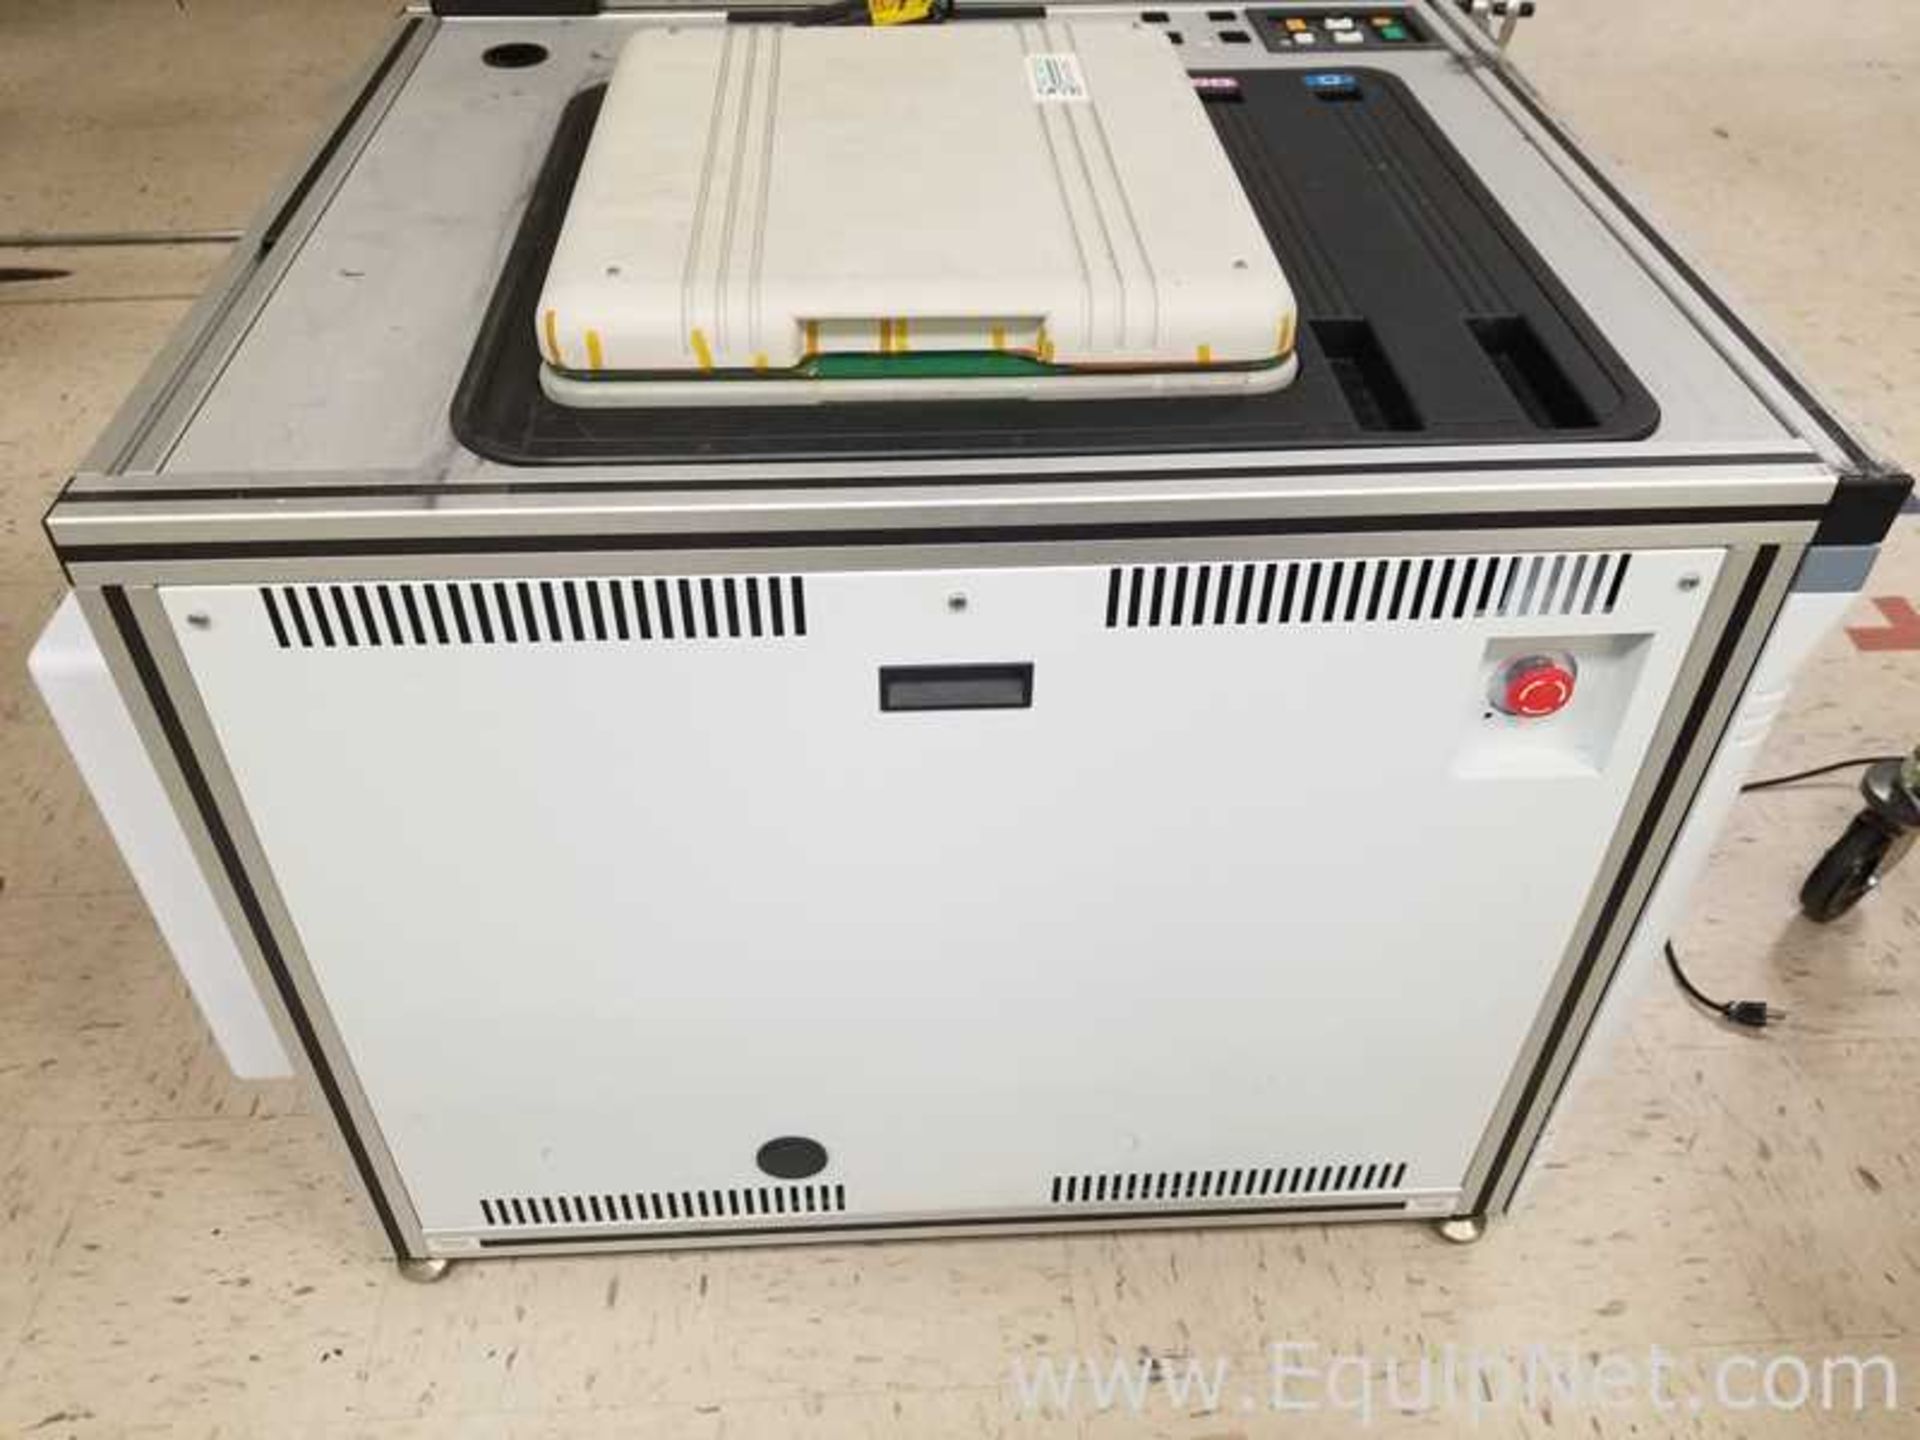 Teradyne SC-108-19 Production Board Test Equipment - Image 3 of 12